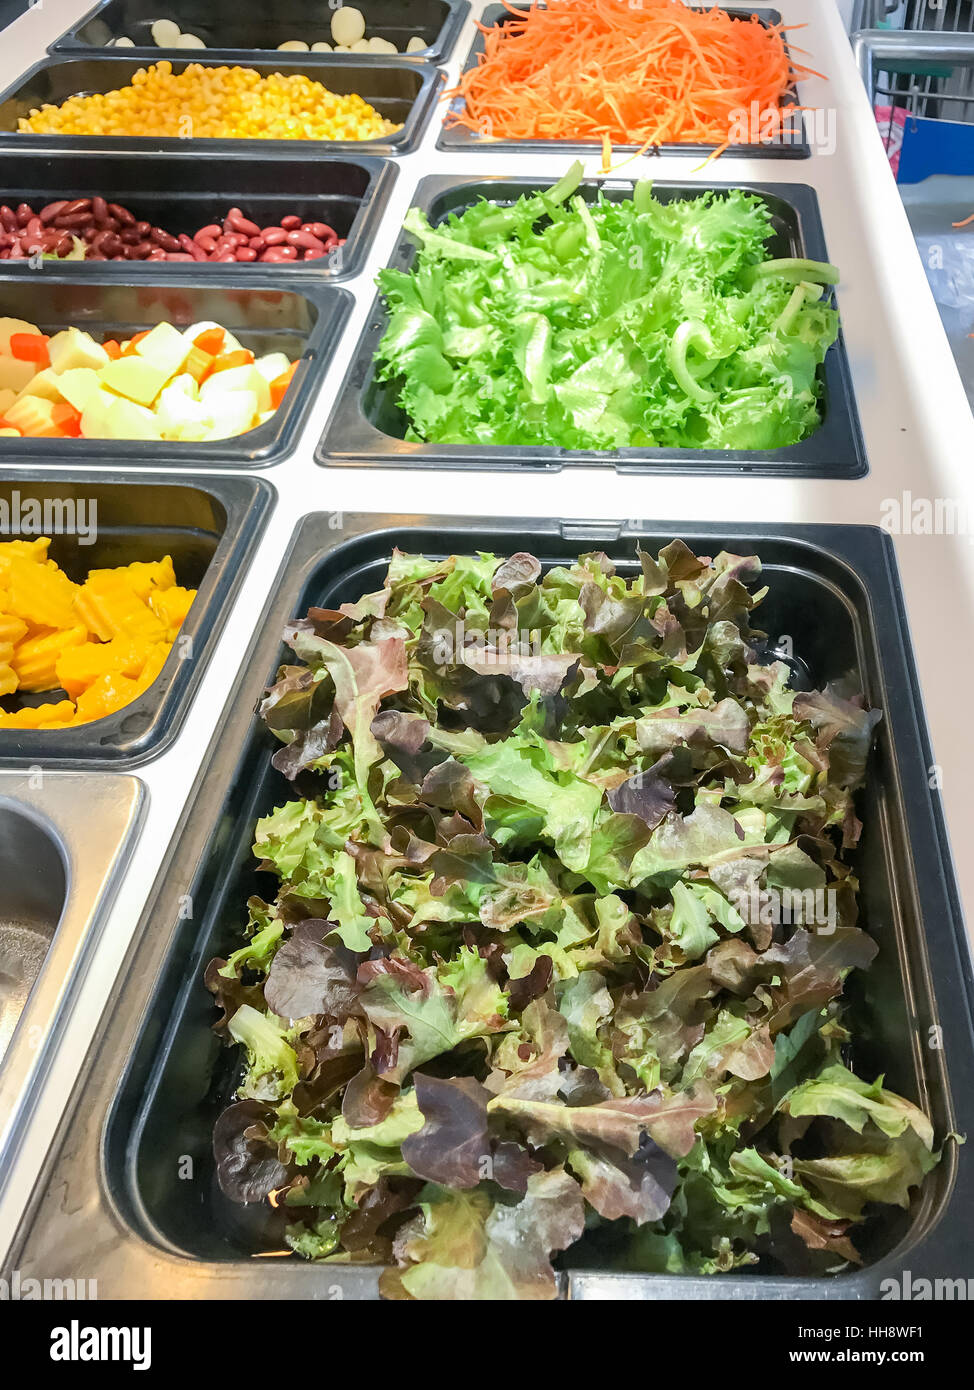 Low calories food salad bar in the food market Stock Photo